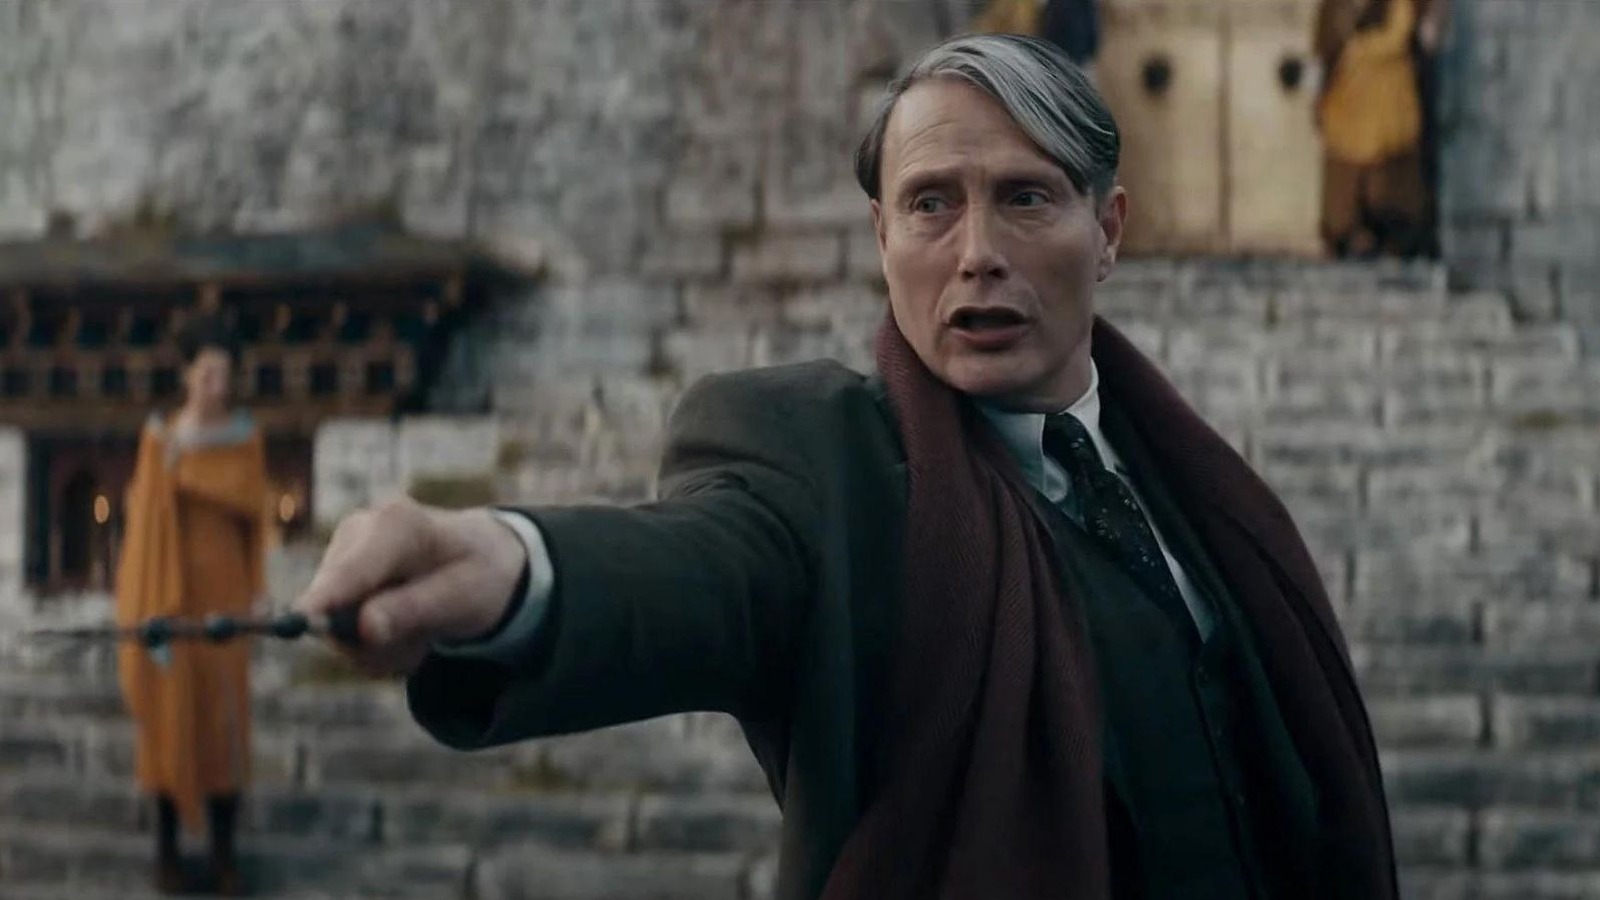 #A Toned-Down Grindelwald Helped Mads Mikkelsen Make The Fantastic Beasts Character His Own